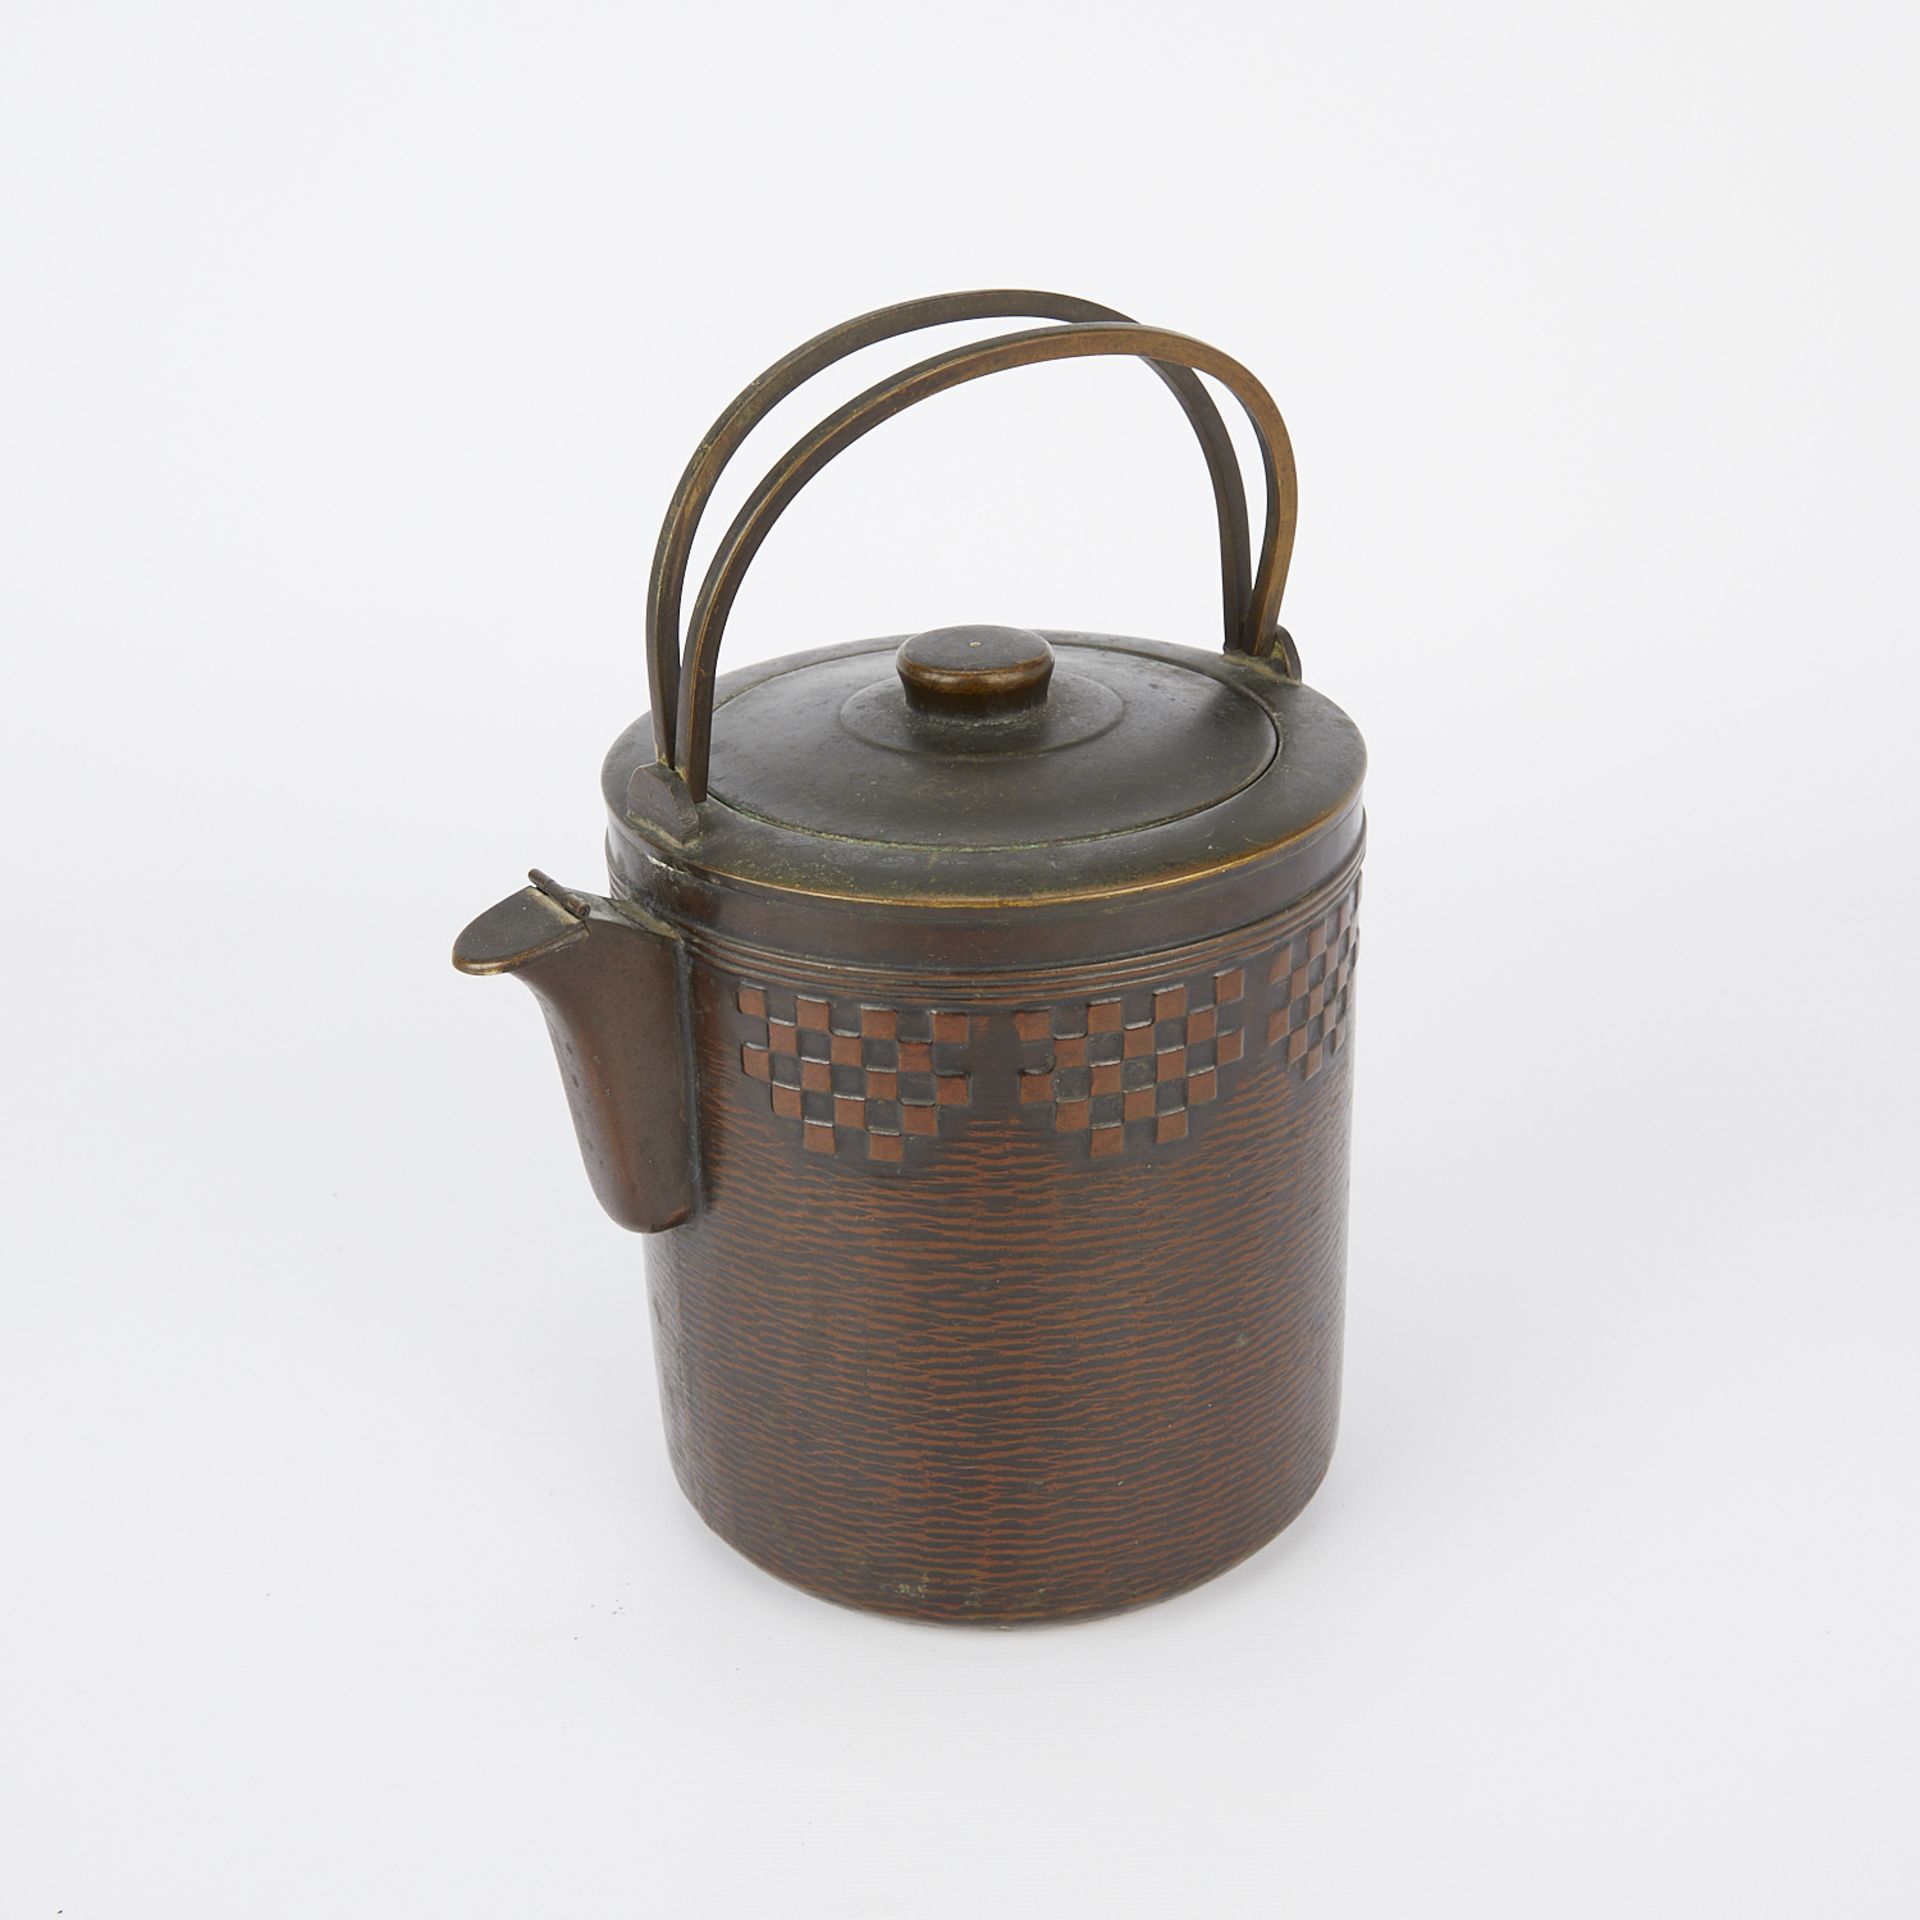 20th c. Japanese Hammered Brass Tea Pot - Image 9 of 13